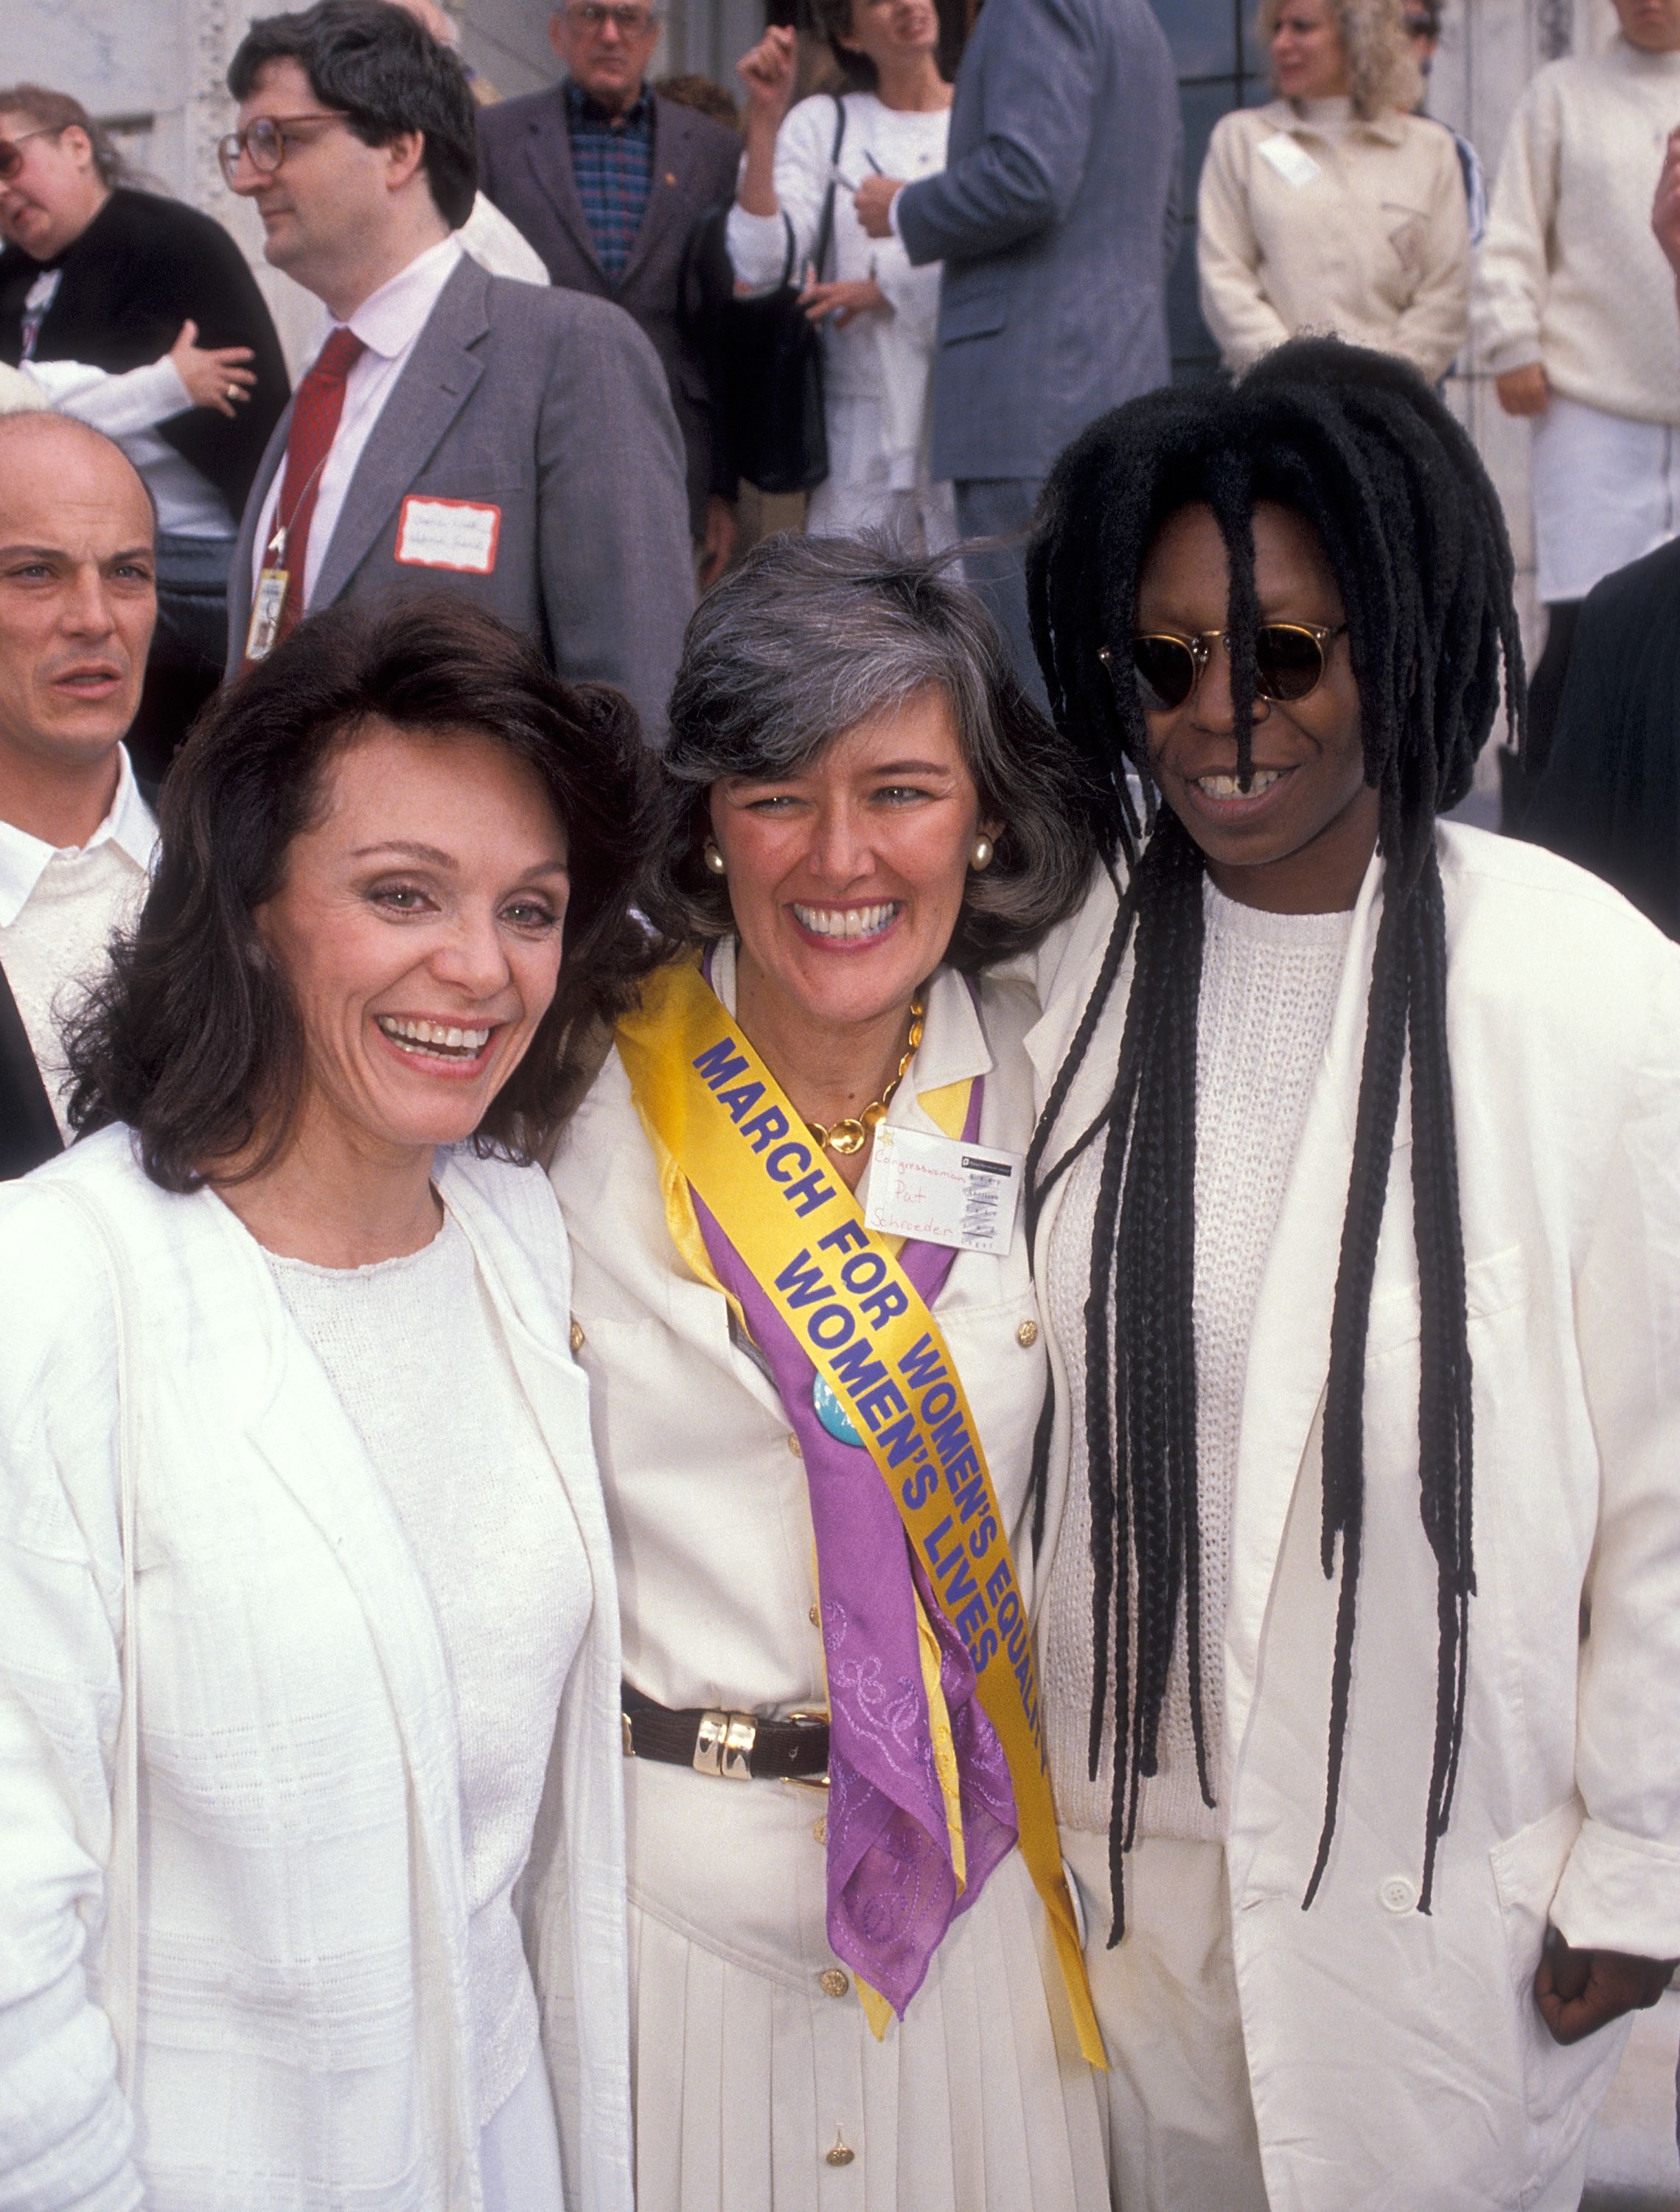 WASHINGTON, DC - APRIL 9: Actress Valerie Harper, politician Patricia Schroeder and actress Whoopi Goldberg attend the National Organization for Women's "March for Women's Equality/Women's Live" Pro-Choice Rally on April 9, 1989 at Capitol Hill in Washington, DC. (Photo by Ron Galella/Ron Galella Collection via Getty Images)